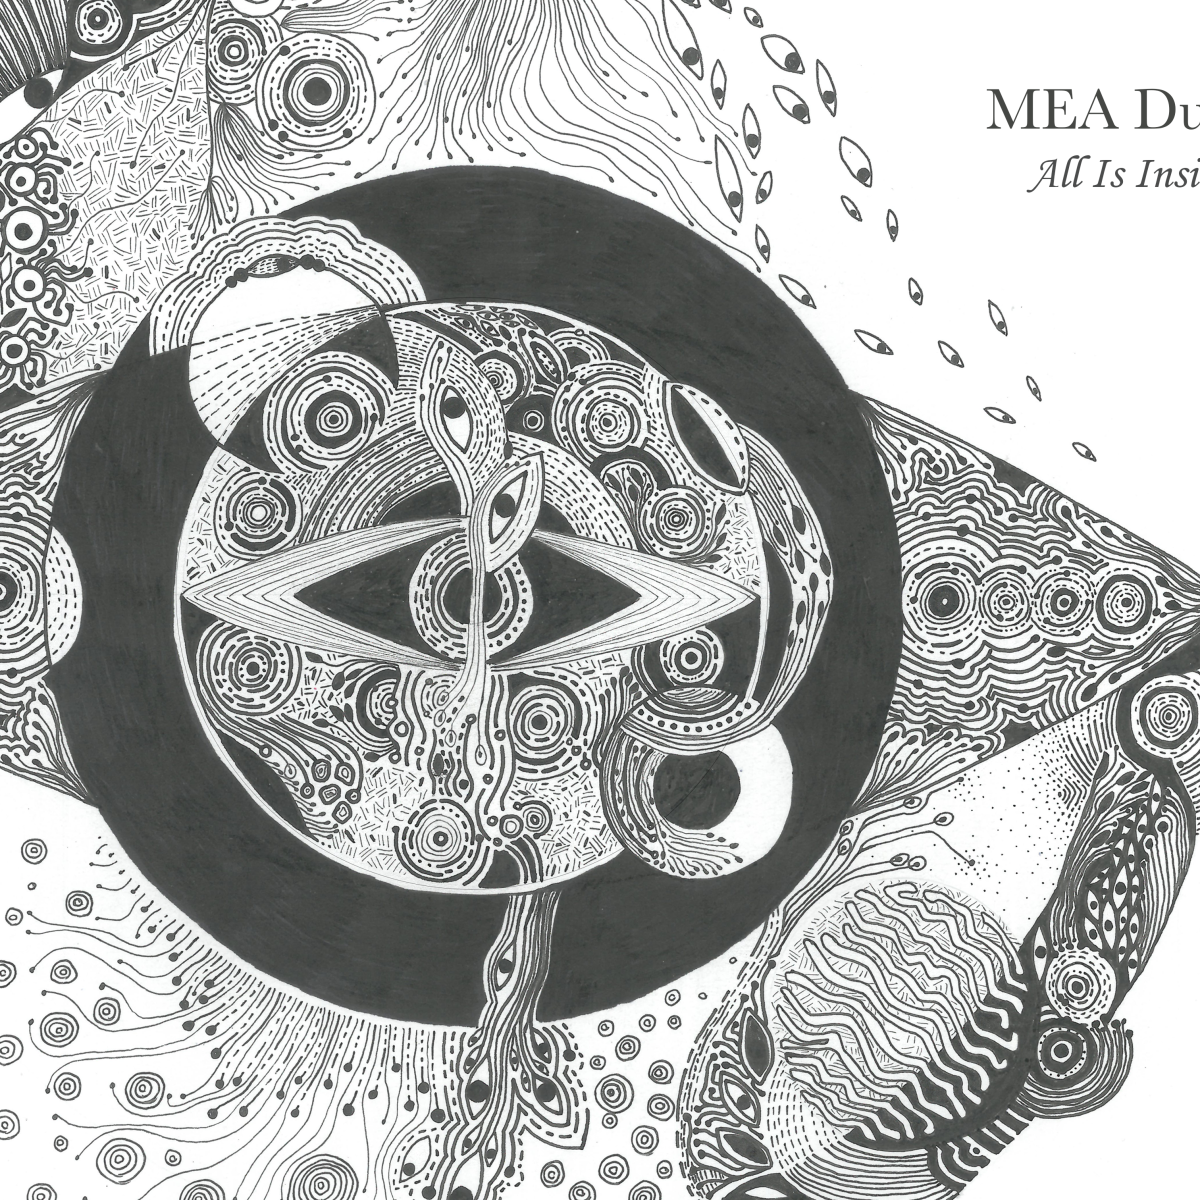 MEA Duo All is Inside album cover